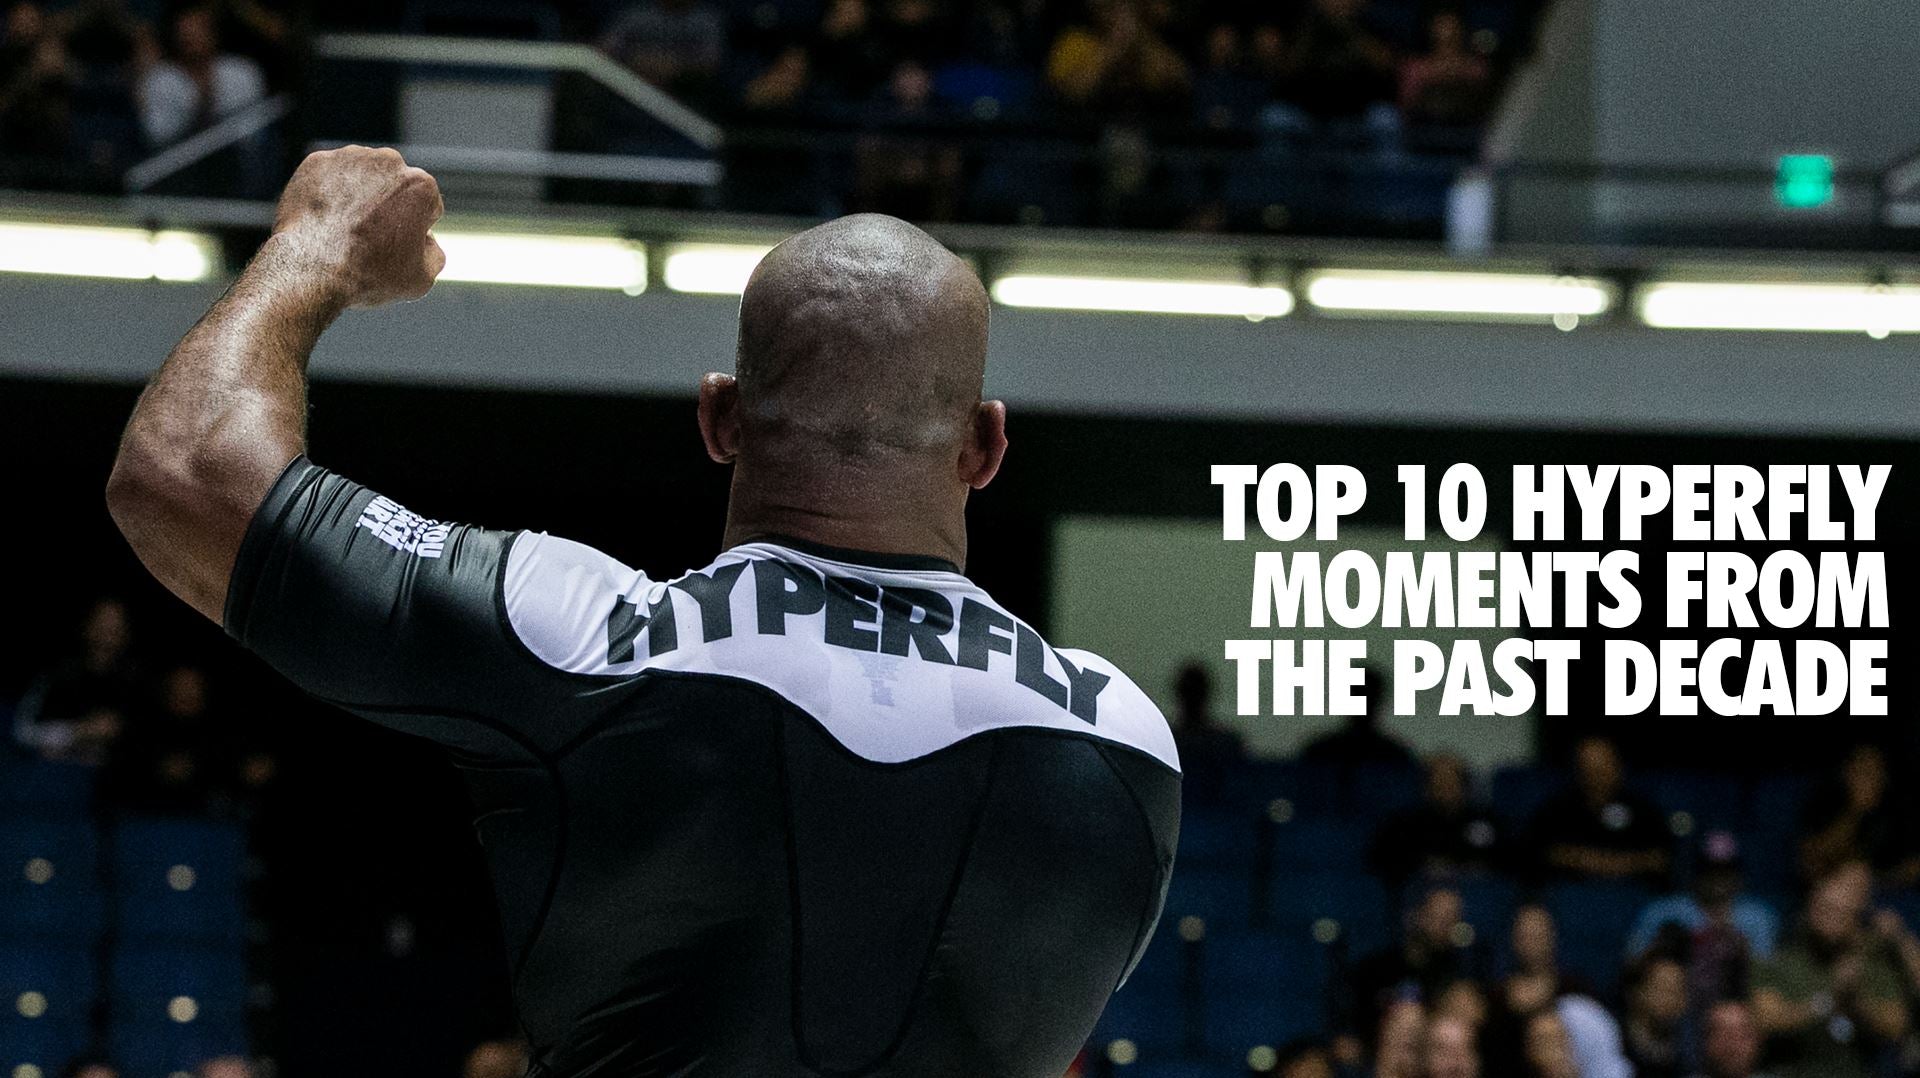 Top 10 Hyperfly Moments From the Last 10 Years